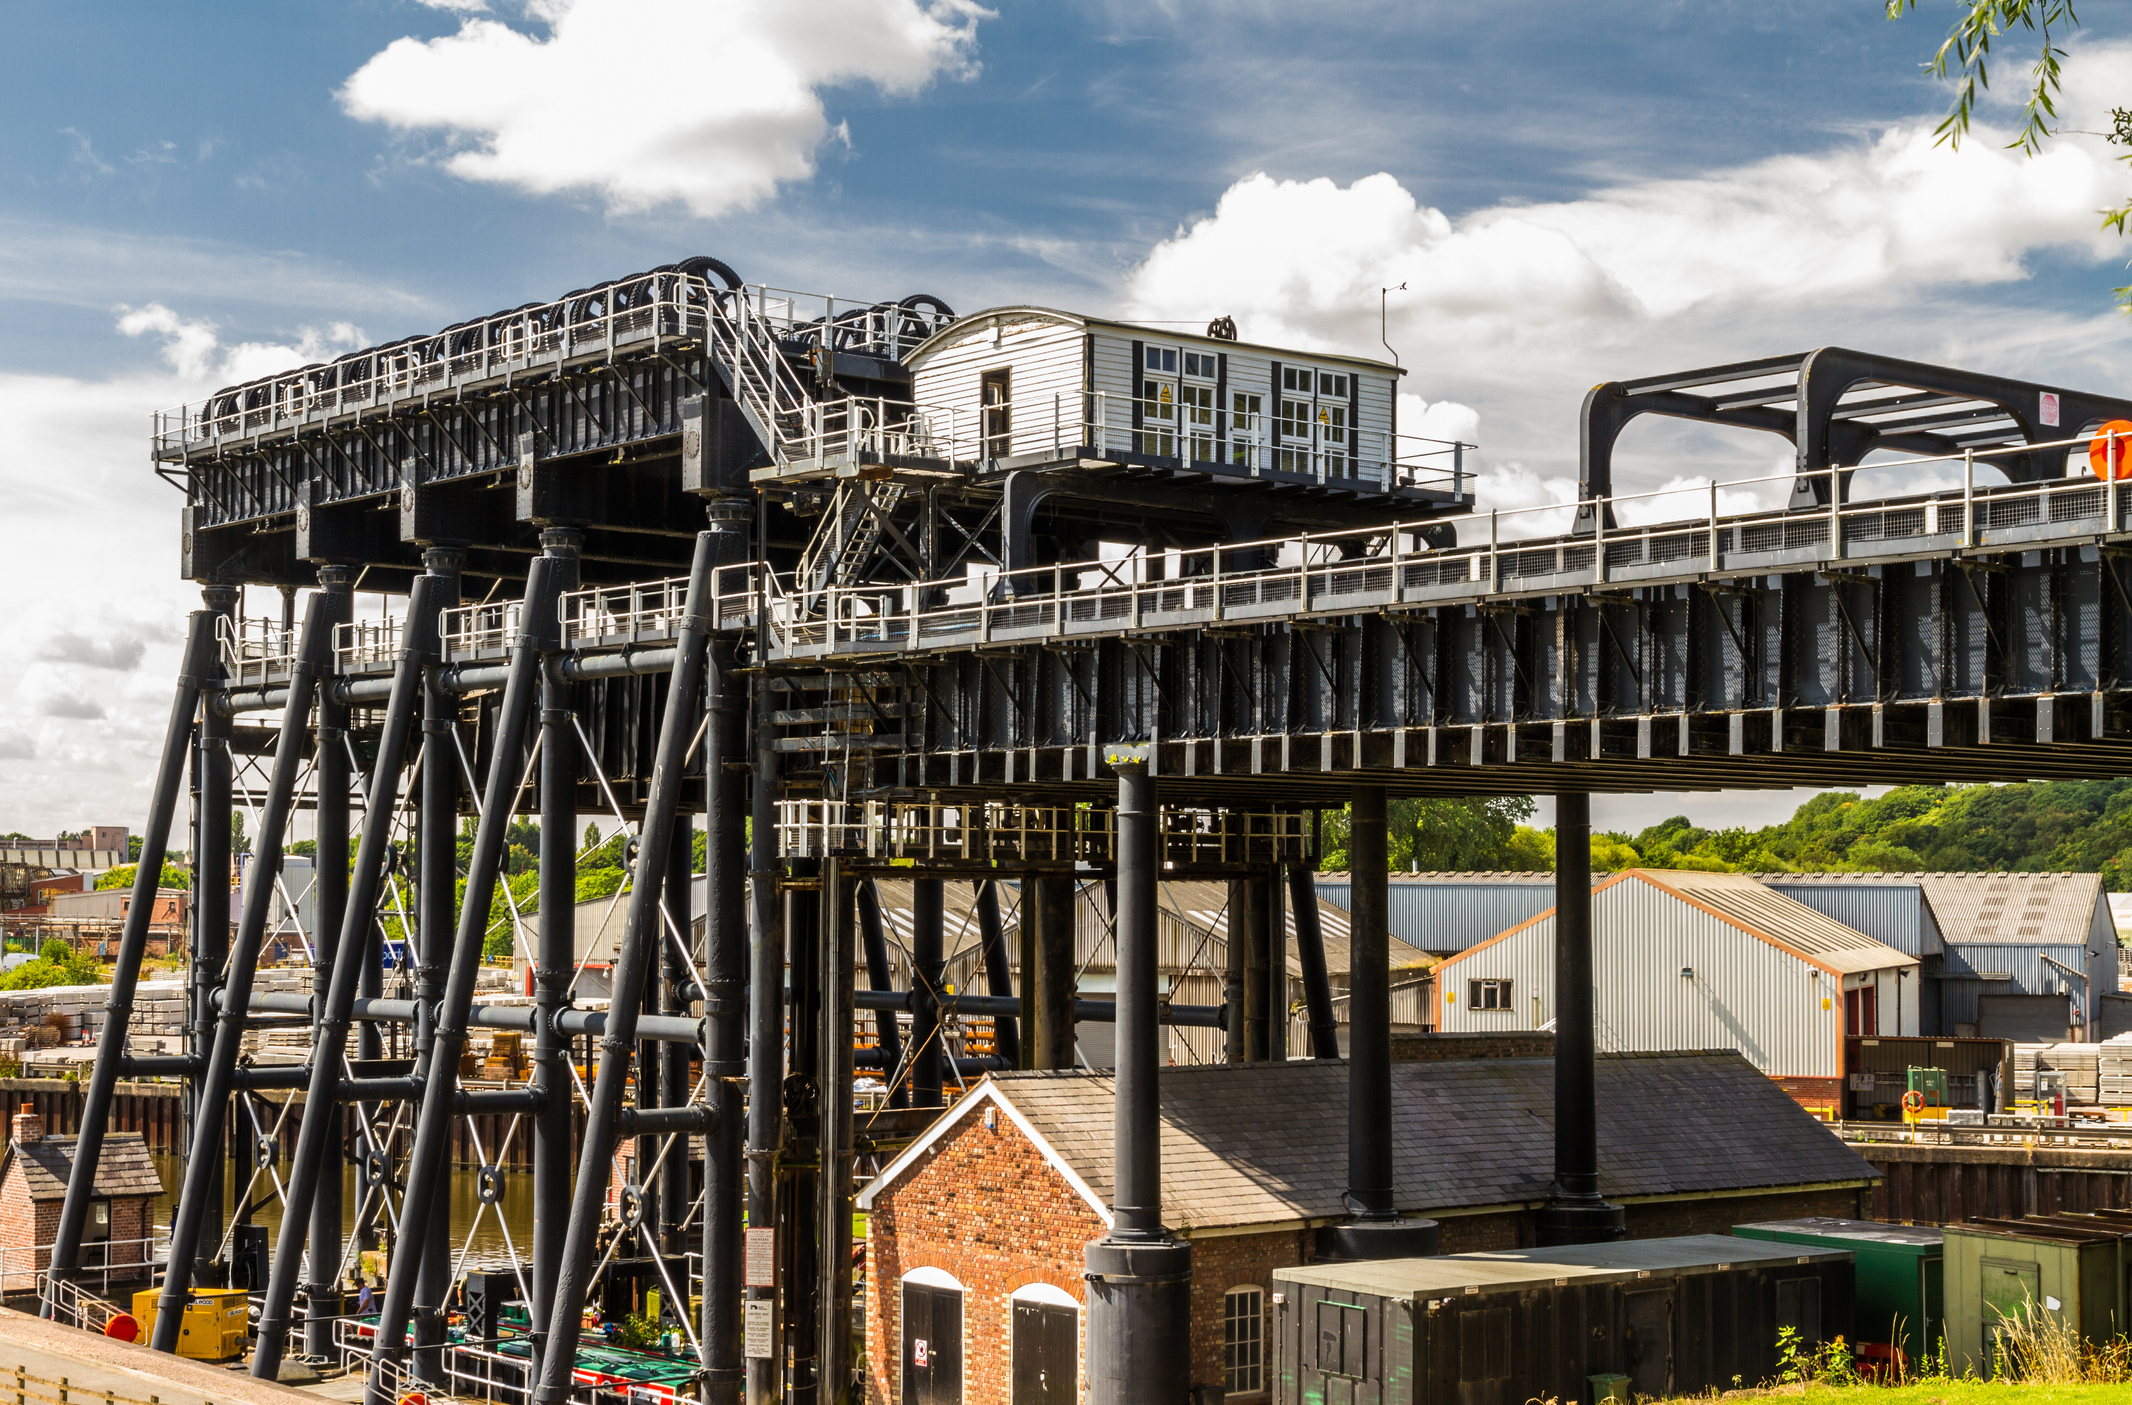 View of the Anderton Boat Lift from the Trent & Mersey Canal